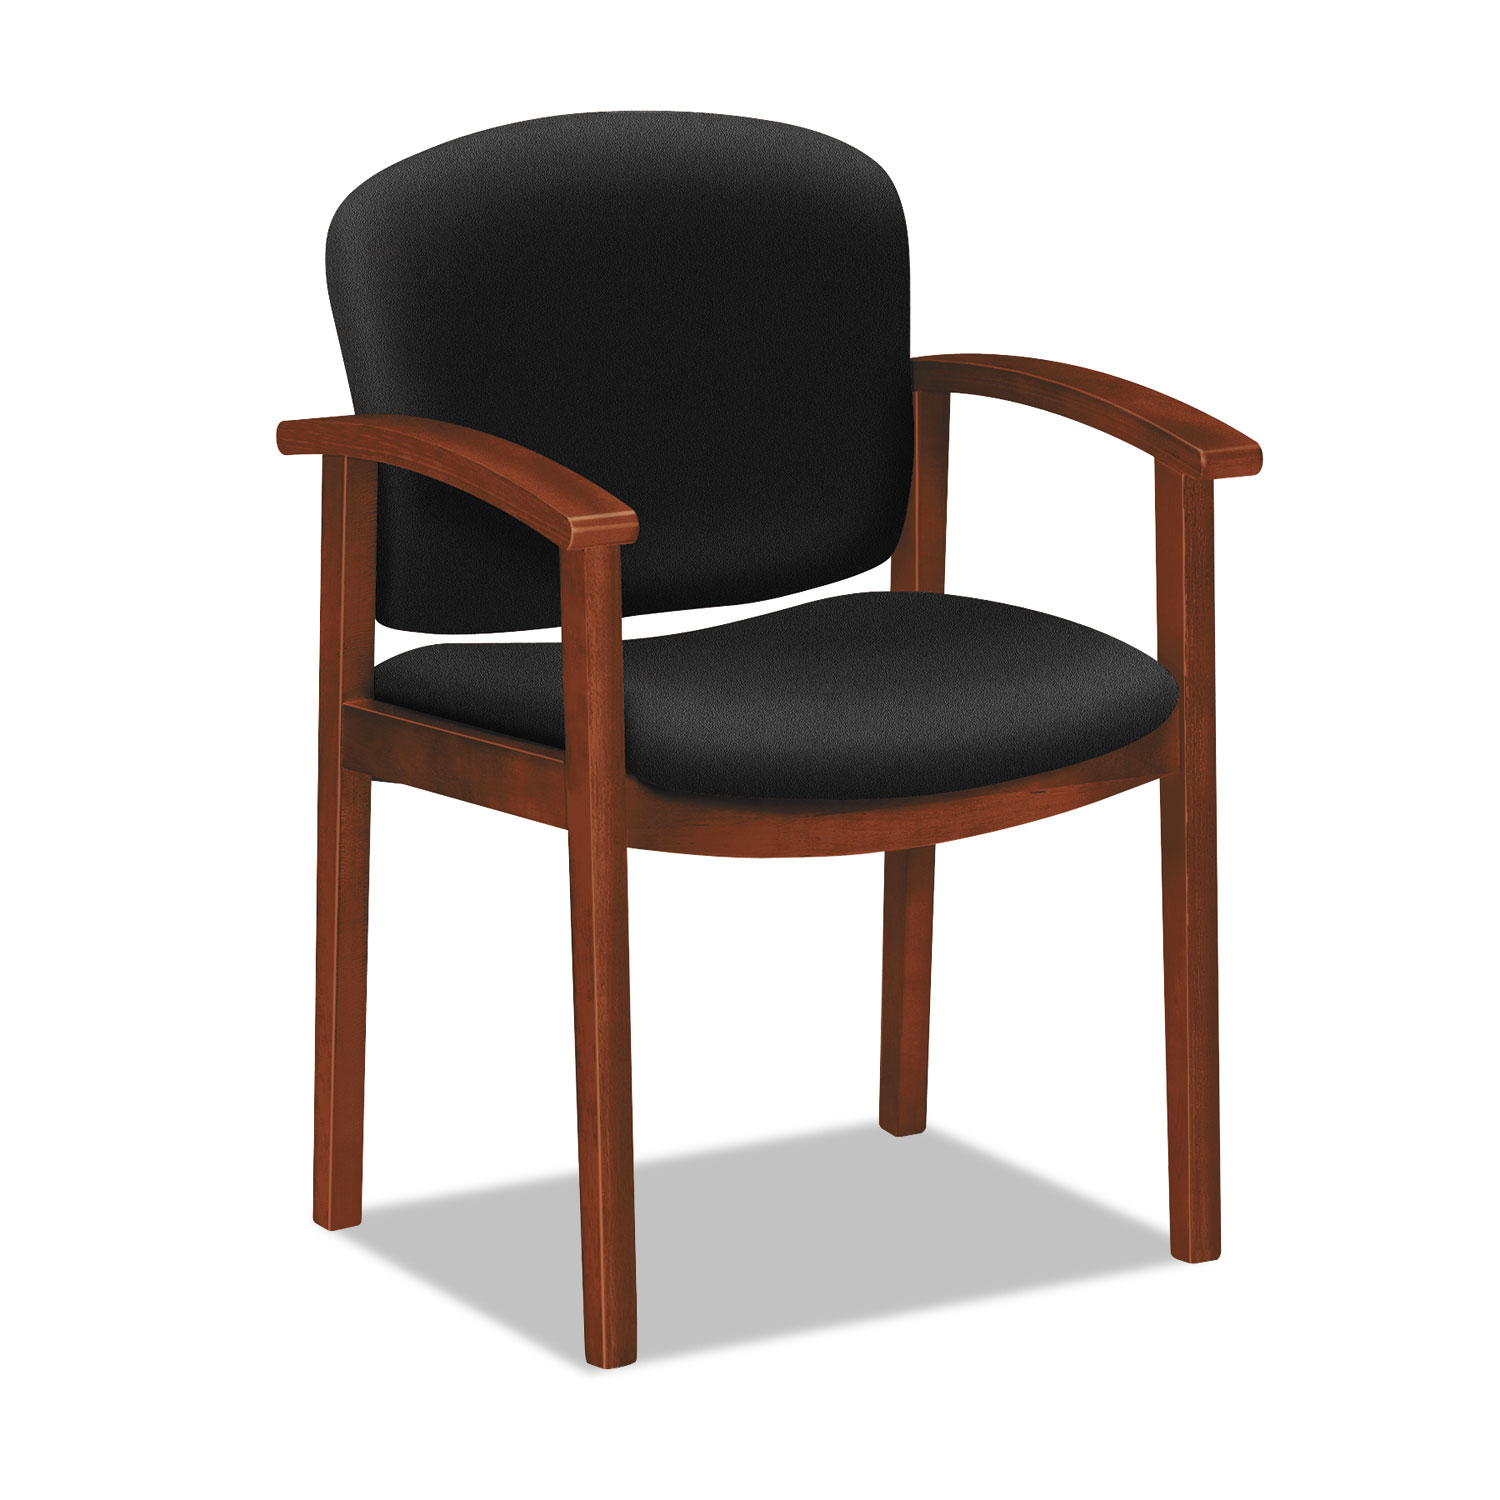 2111 Invitation Reception Series Wood Guest Chair, Cognac/Solid Black Fabric